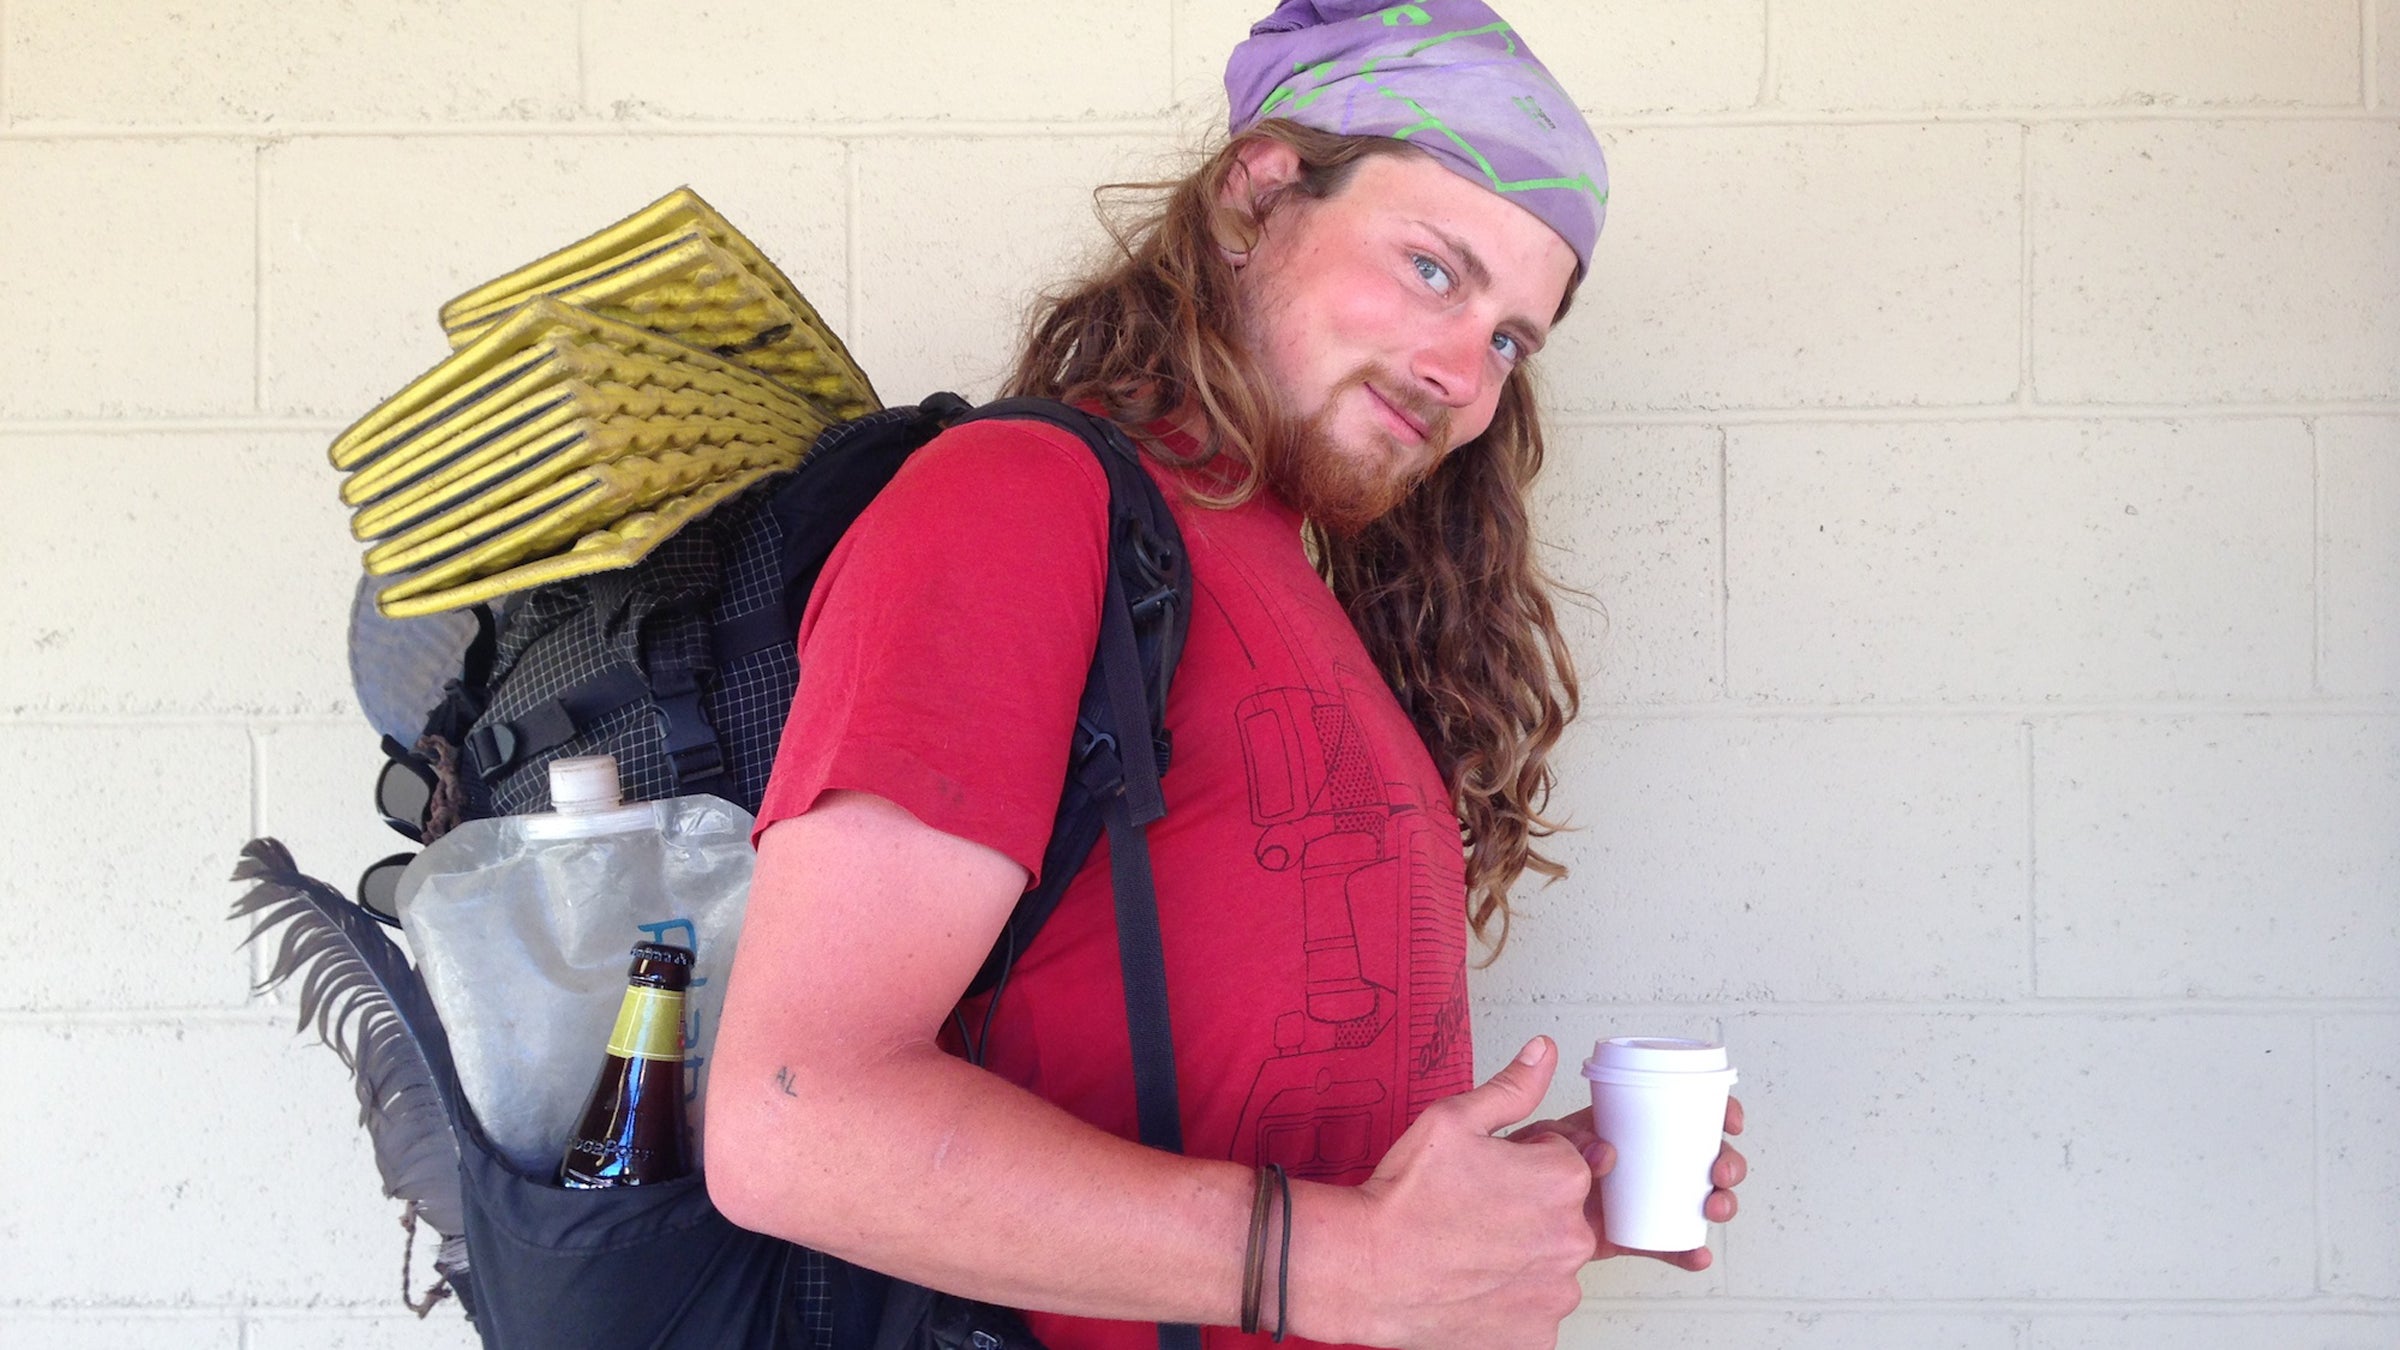 Ethan Bisset, 25
Trail Name: Homeboy
Salt Lake City, Utah
“I’ve changed on this trail. I’ve learned that we should put all our trust in who we know and not what we got. I’ll go home with the trail in my heart. I’ll go home with dirt in my lungs and my hair and under my fingernails. Be friends. Don’t burn bridges and try not to pee in someone’s backyard!”